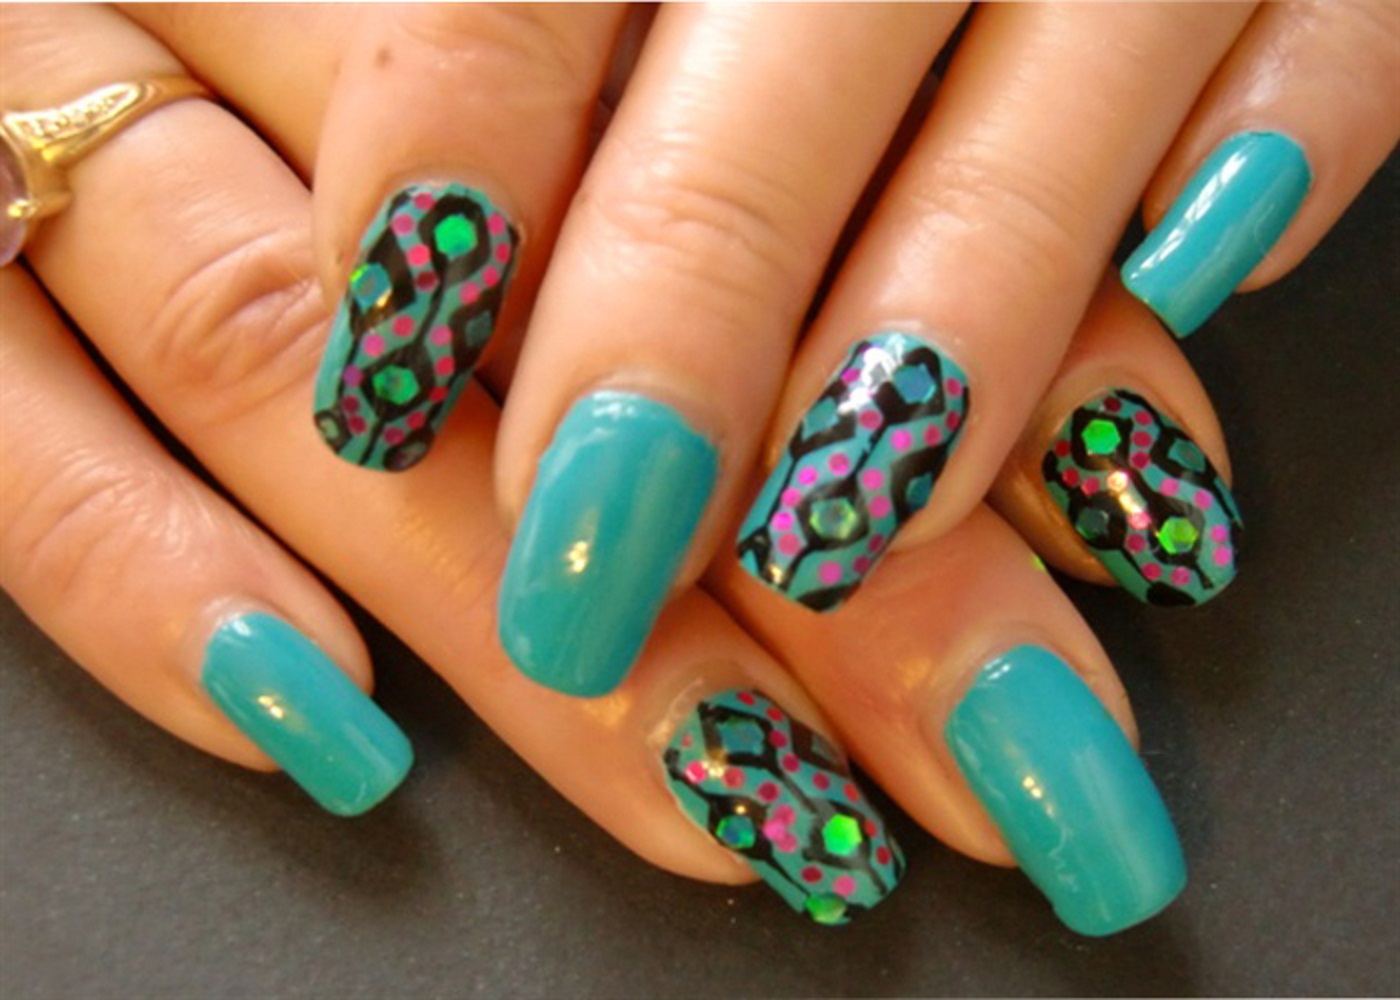 9. Beautiful Floral Nail Art Design for Summer - wide 10